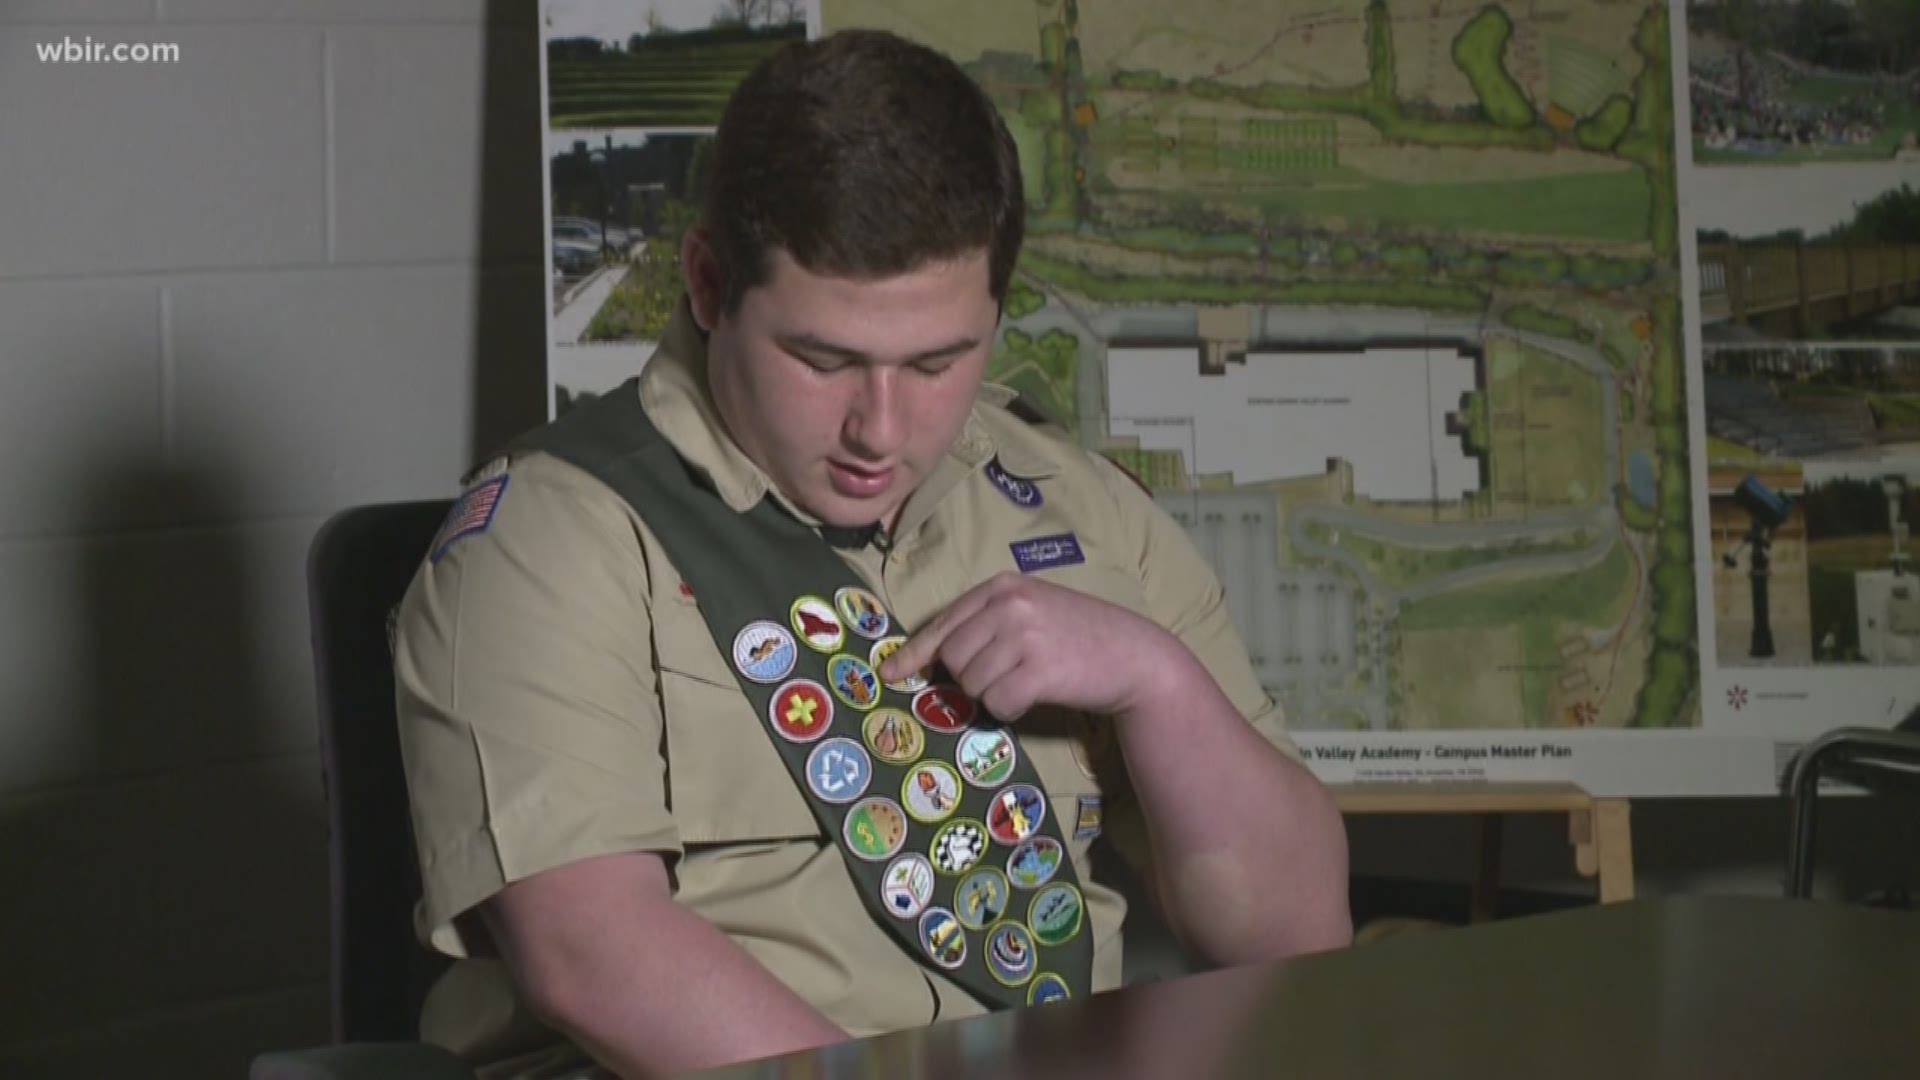 Max Berry is a Hardin Valley Academy student who had an idea for community service project in hopes of achieving the Eagle Scout rank in the Boy Scouts of America. He created the Piney Grove Cemetery Service Project in Knoxville. Take a picture of a tombstone. Upload it. Transcribe the words engraved on it. The photo becomes part of a searchable database online.   May 8, 2019-4pm